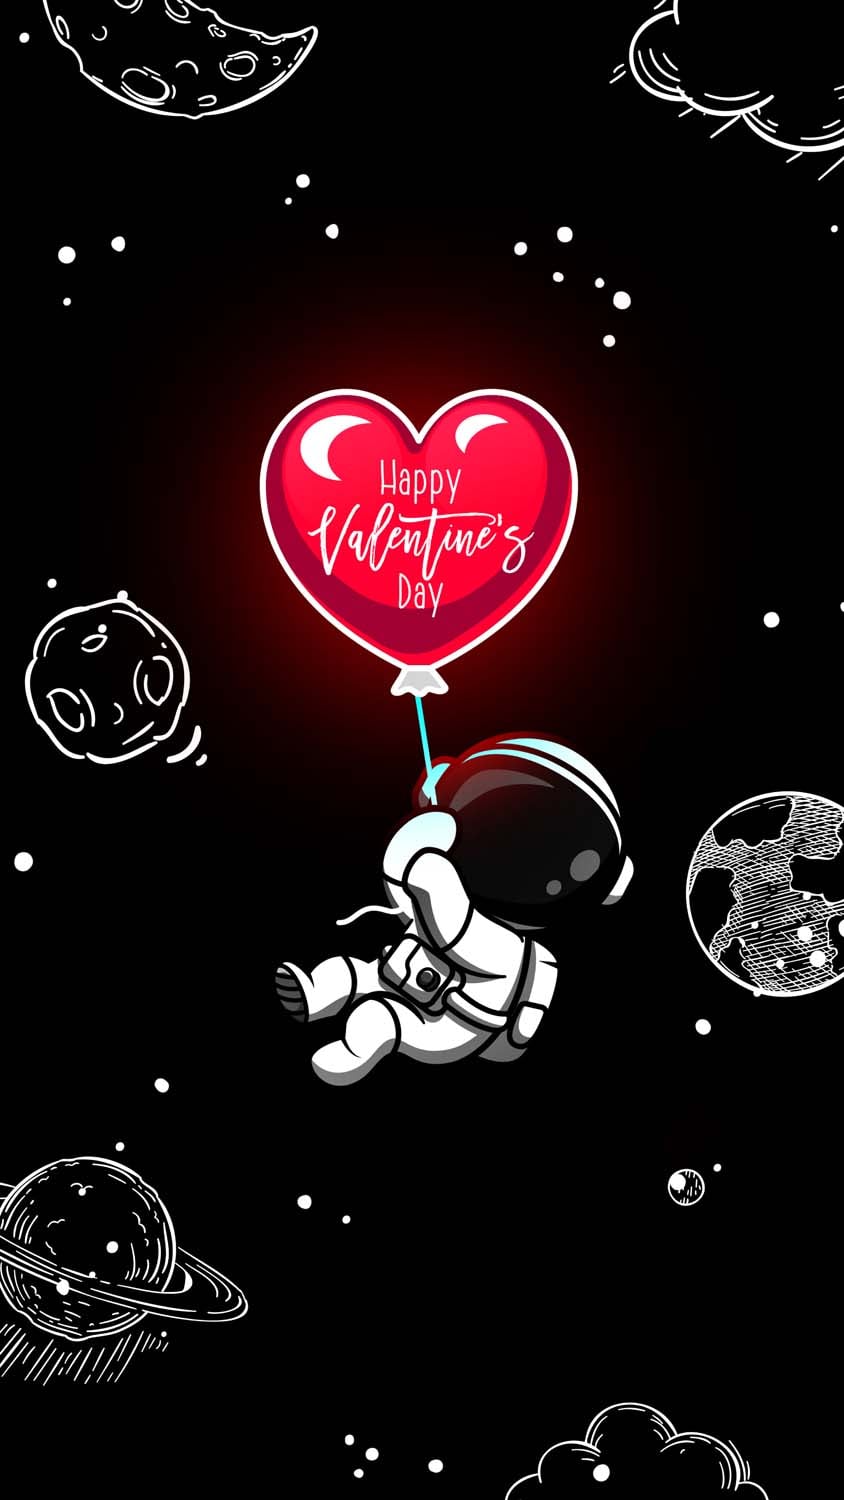 Happy Valentines Day from Space iPhone Wallpaper HD